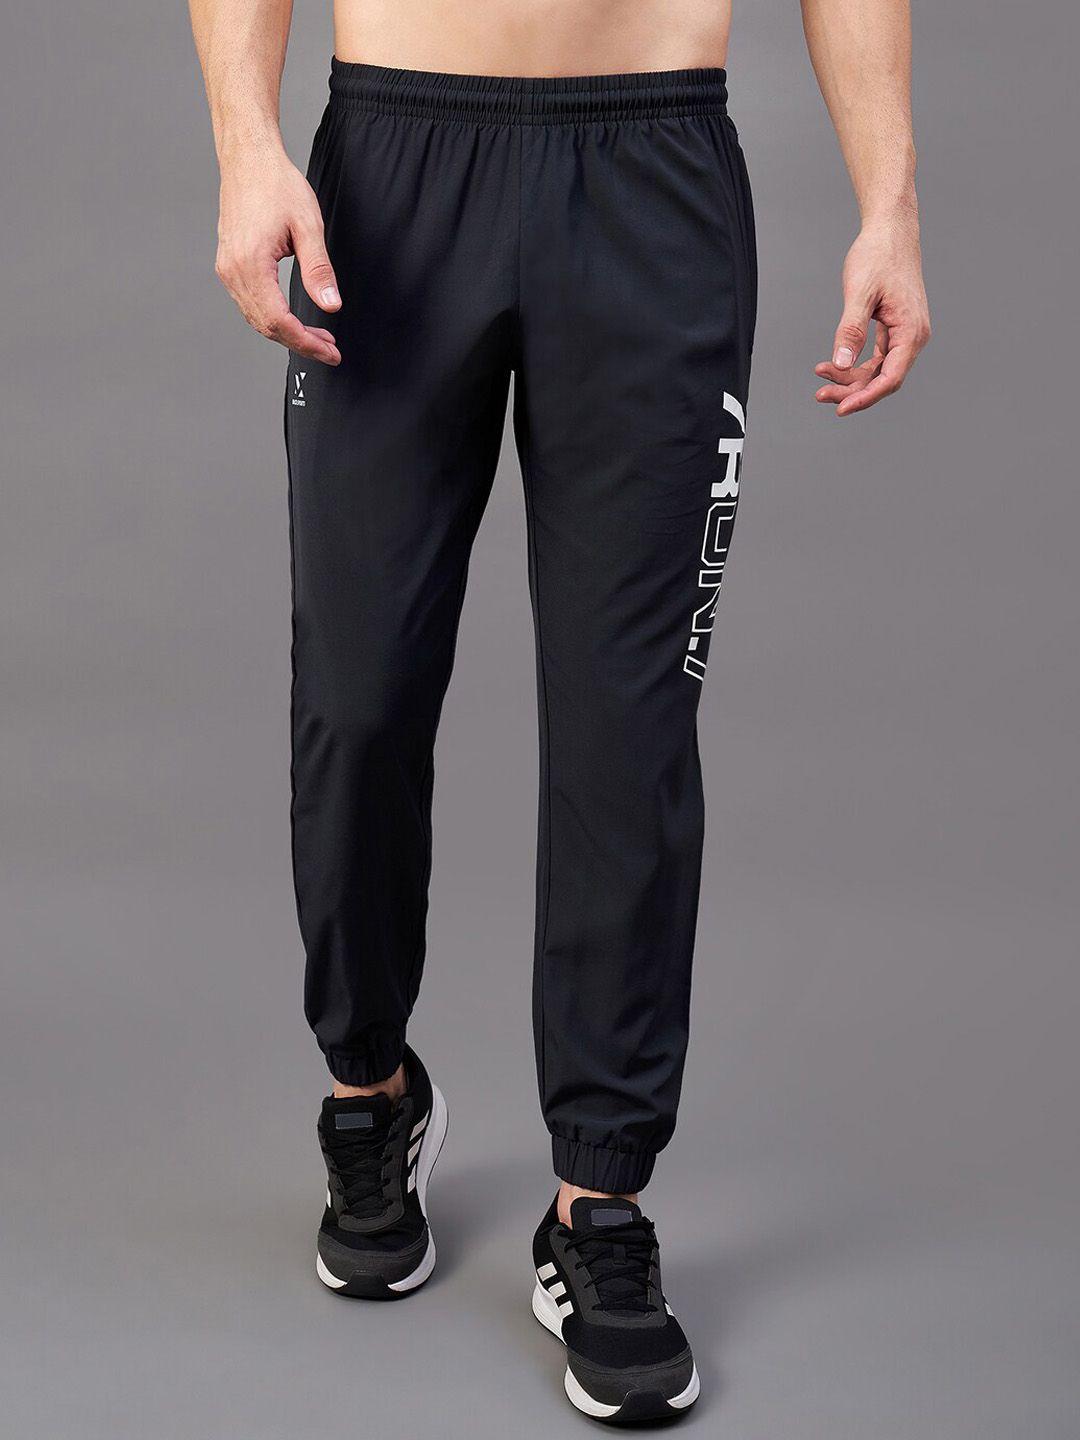 masch-sports-men-mid-rise-typography-printed-rapid-dry-sports-joggers